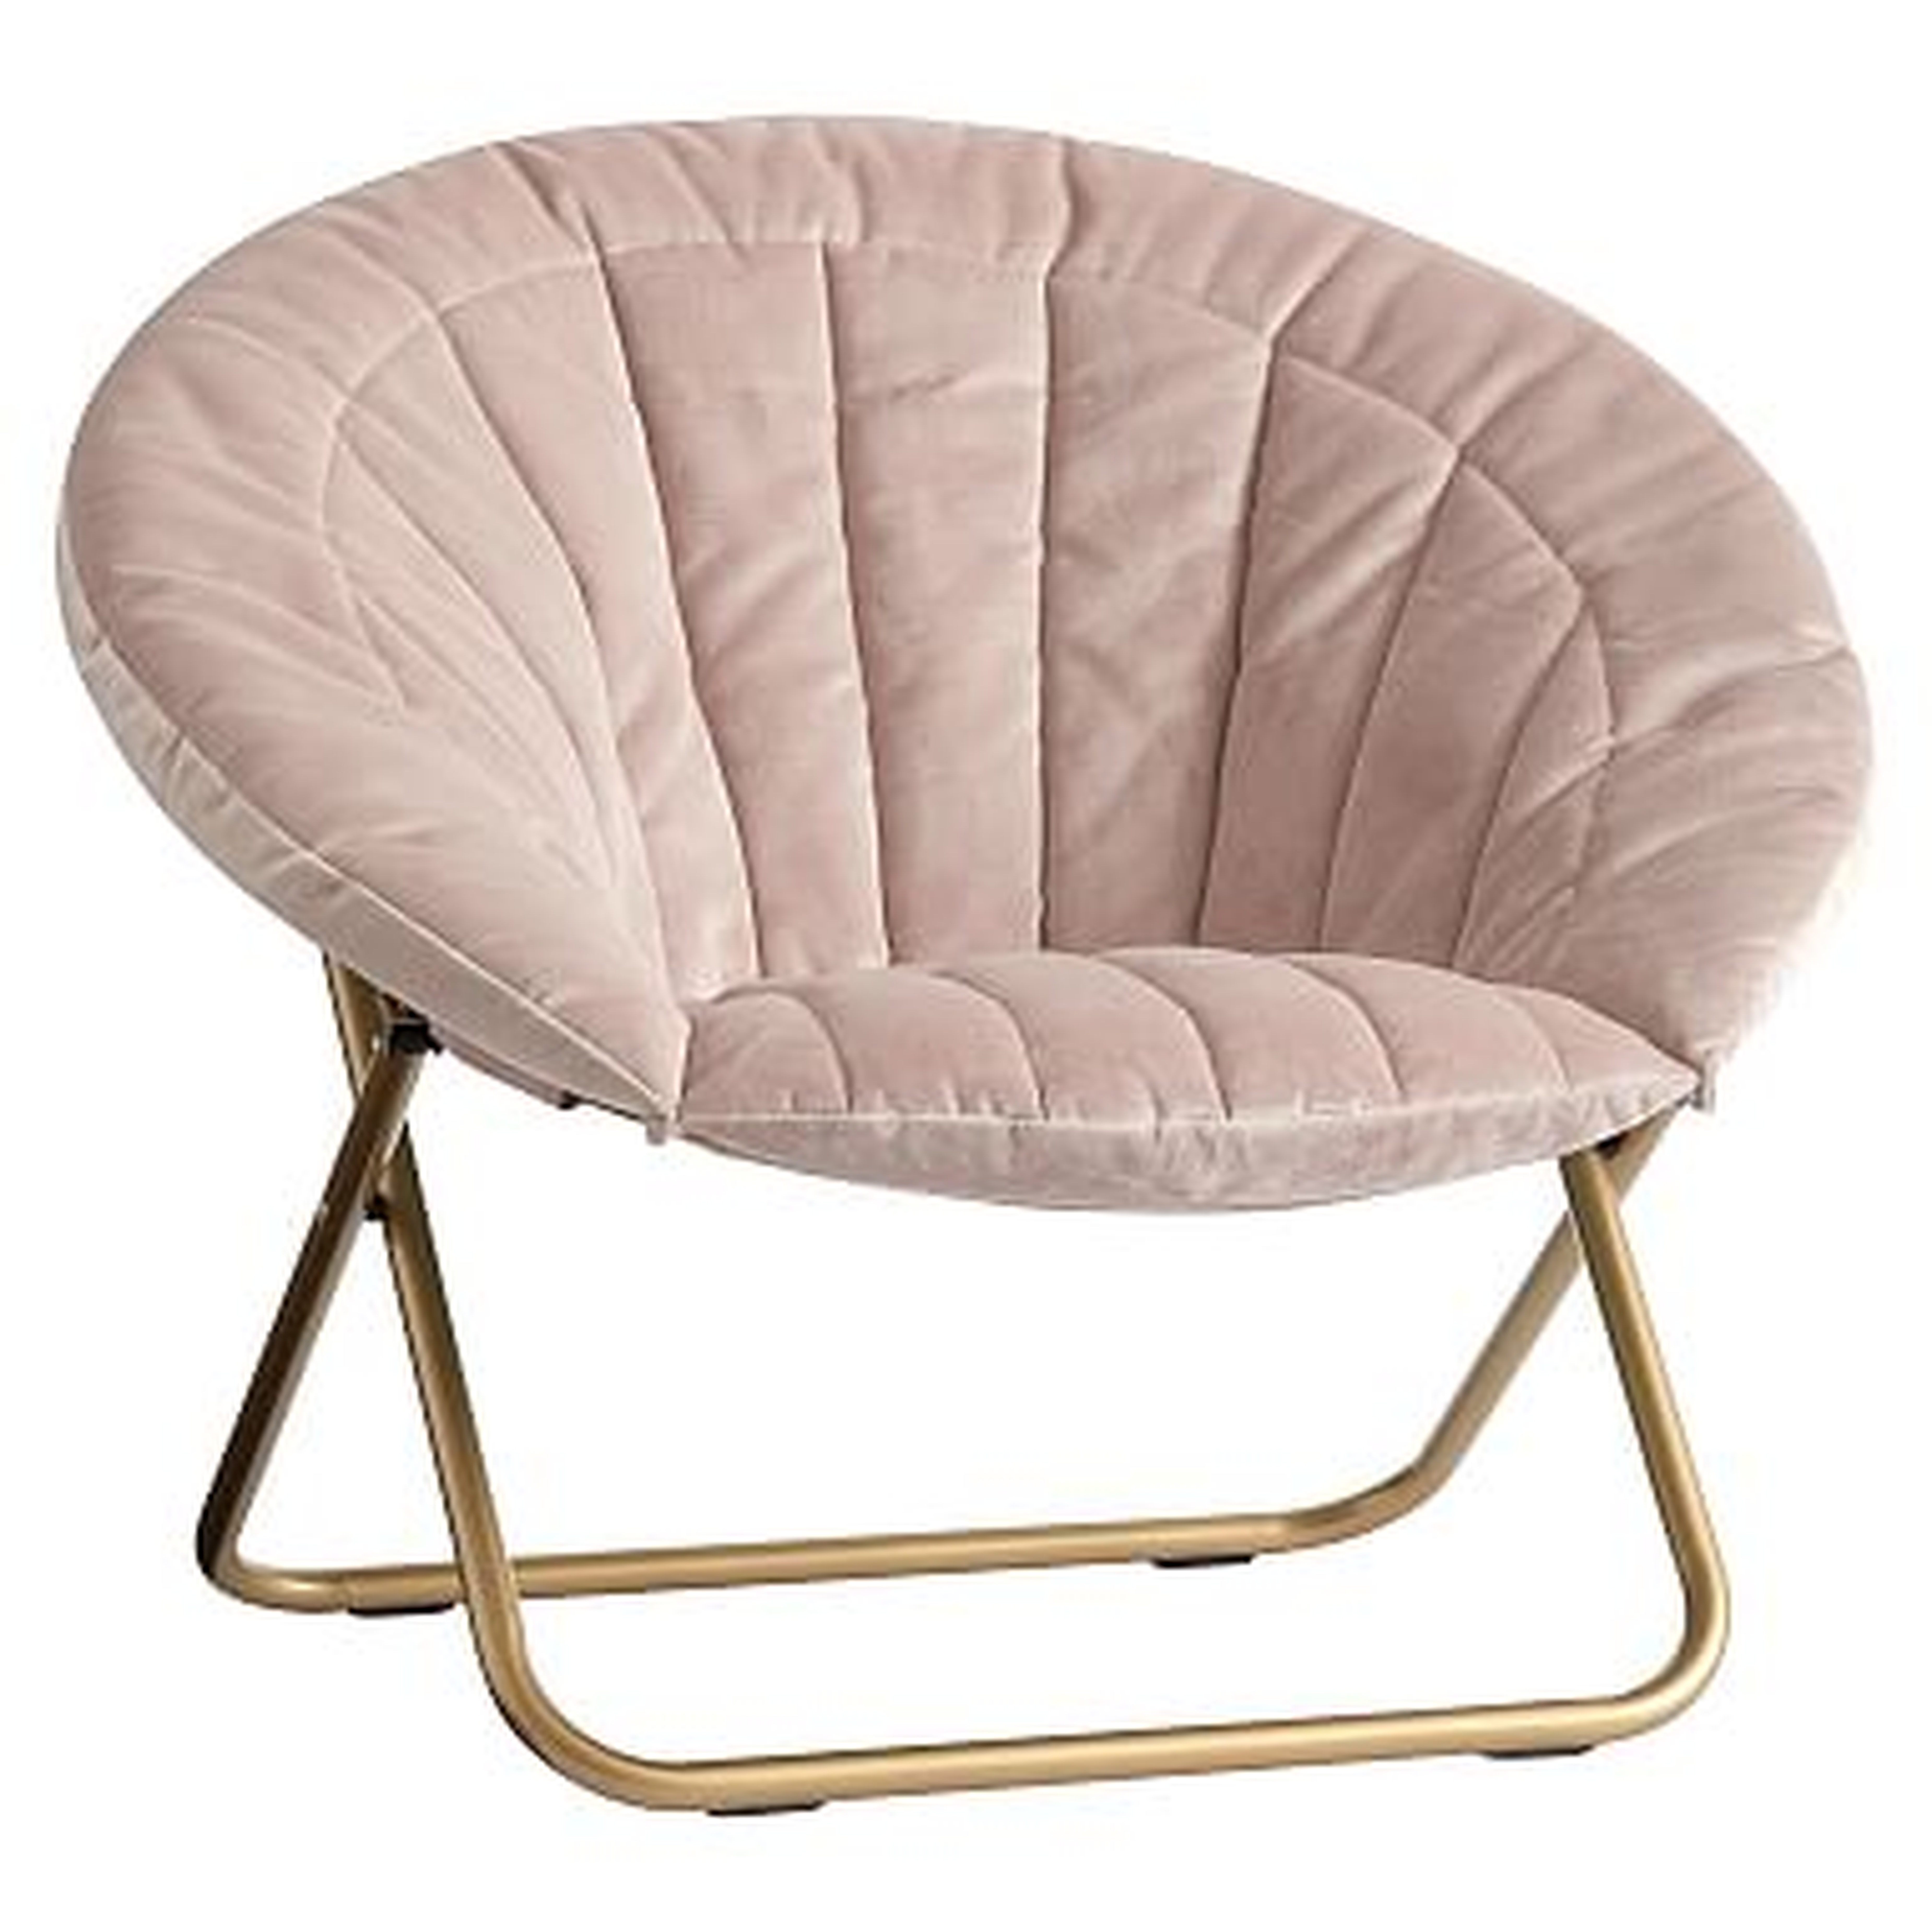 Dusty Blush Lustre Velvet Channel Stitch Hang-A-Round Chair - Pottery Barn Teen